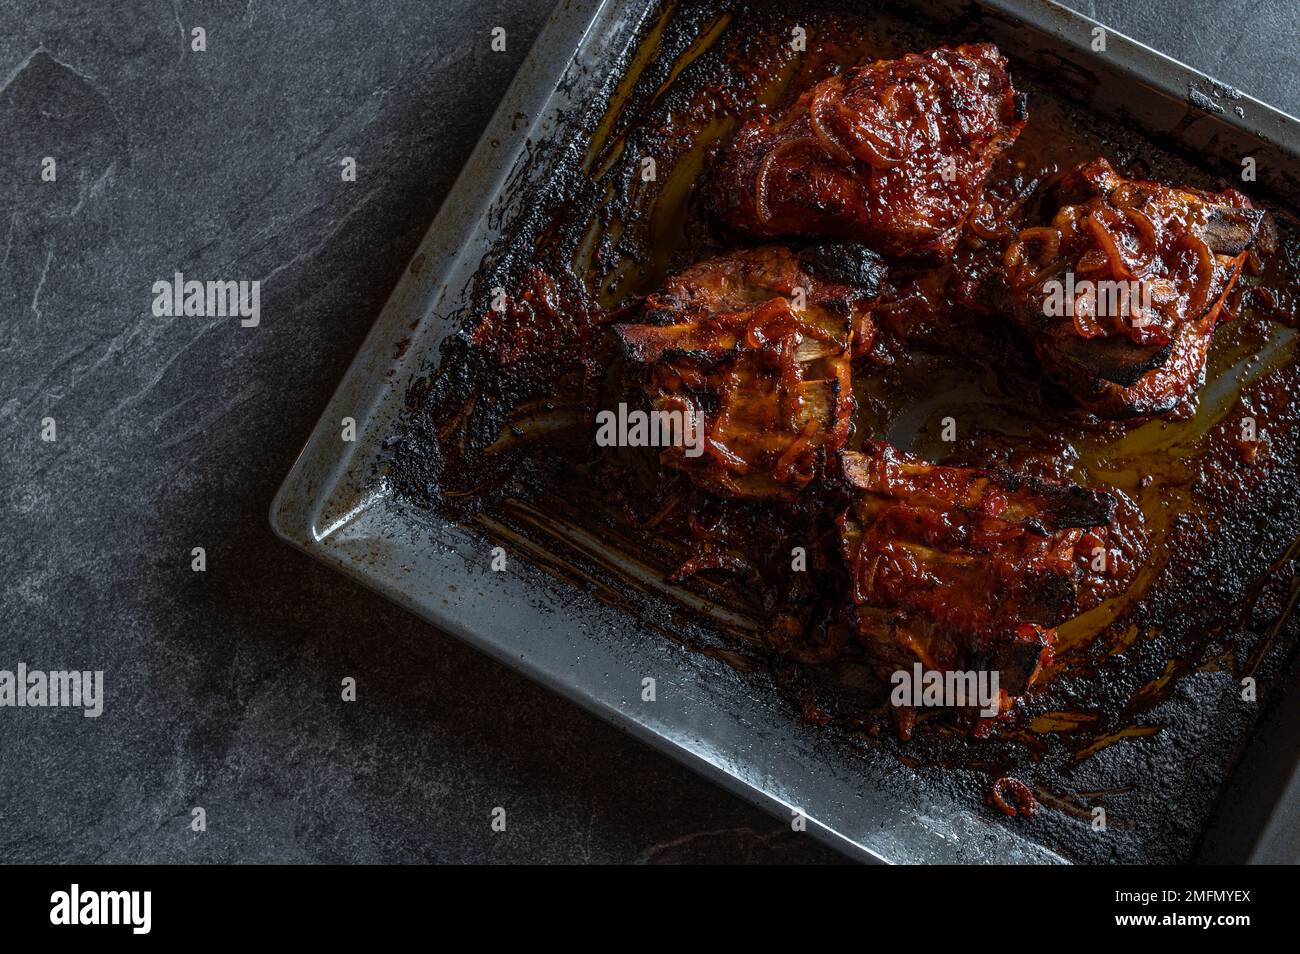 Thick pork ribs with homemade barbecue sauce on a baking tray isolated on dark background. Flat lay Stock Photo